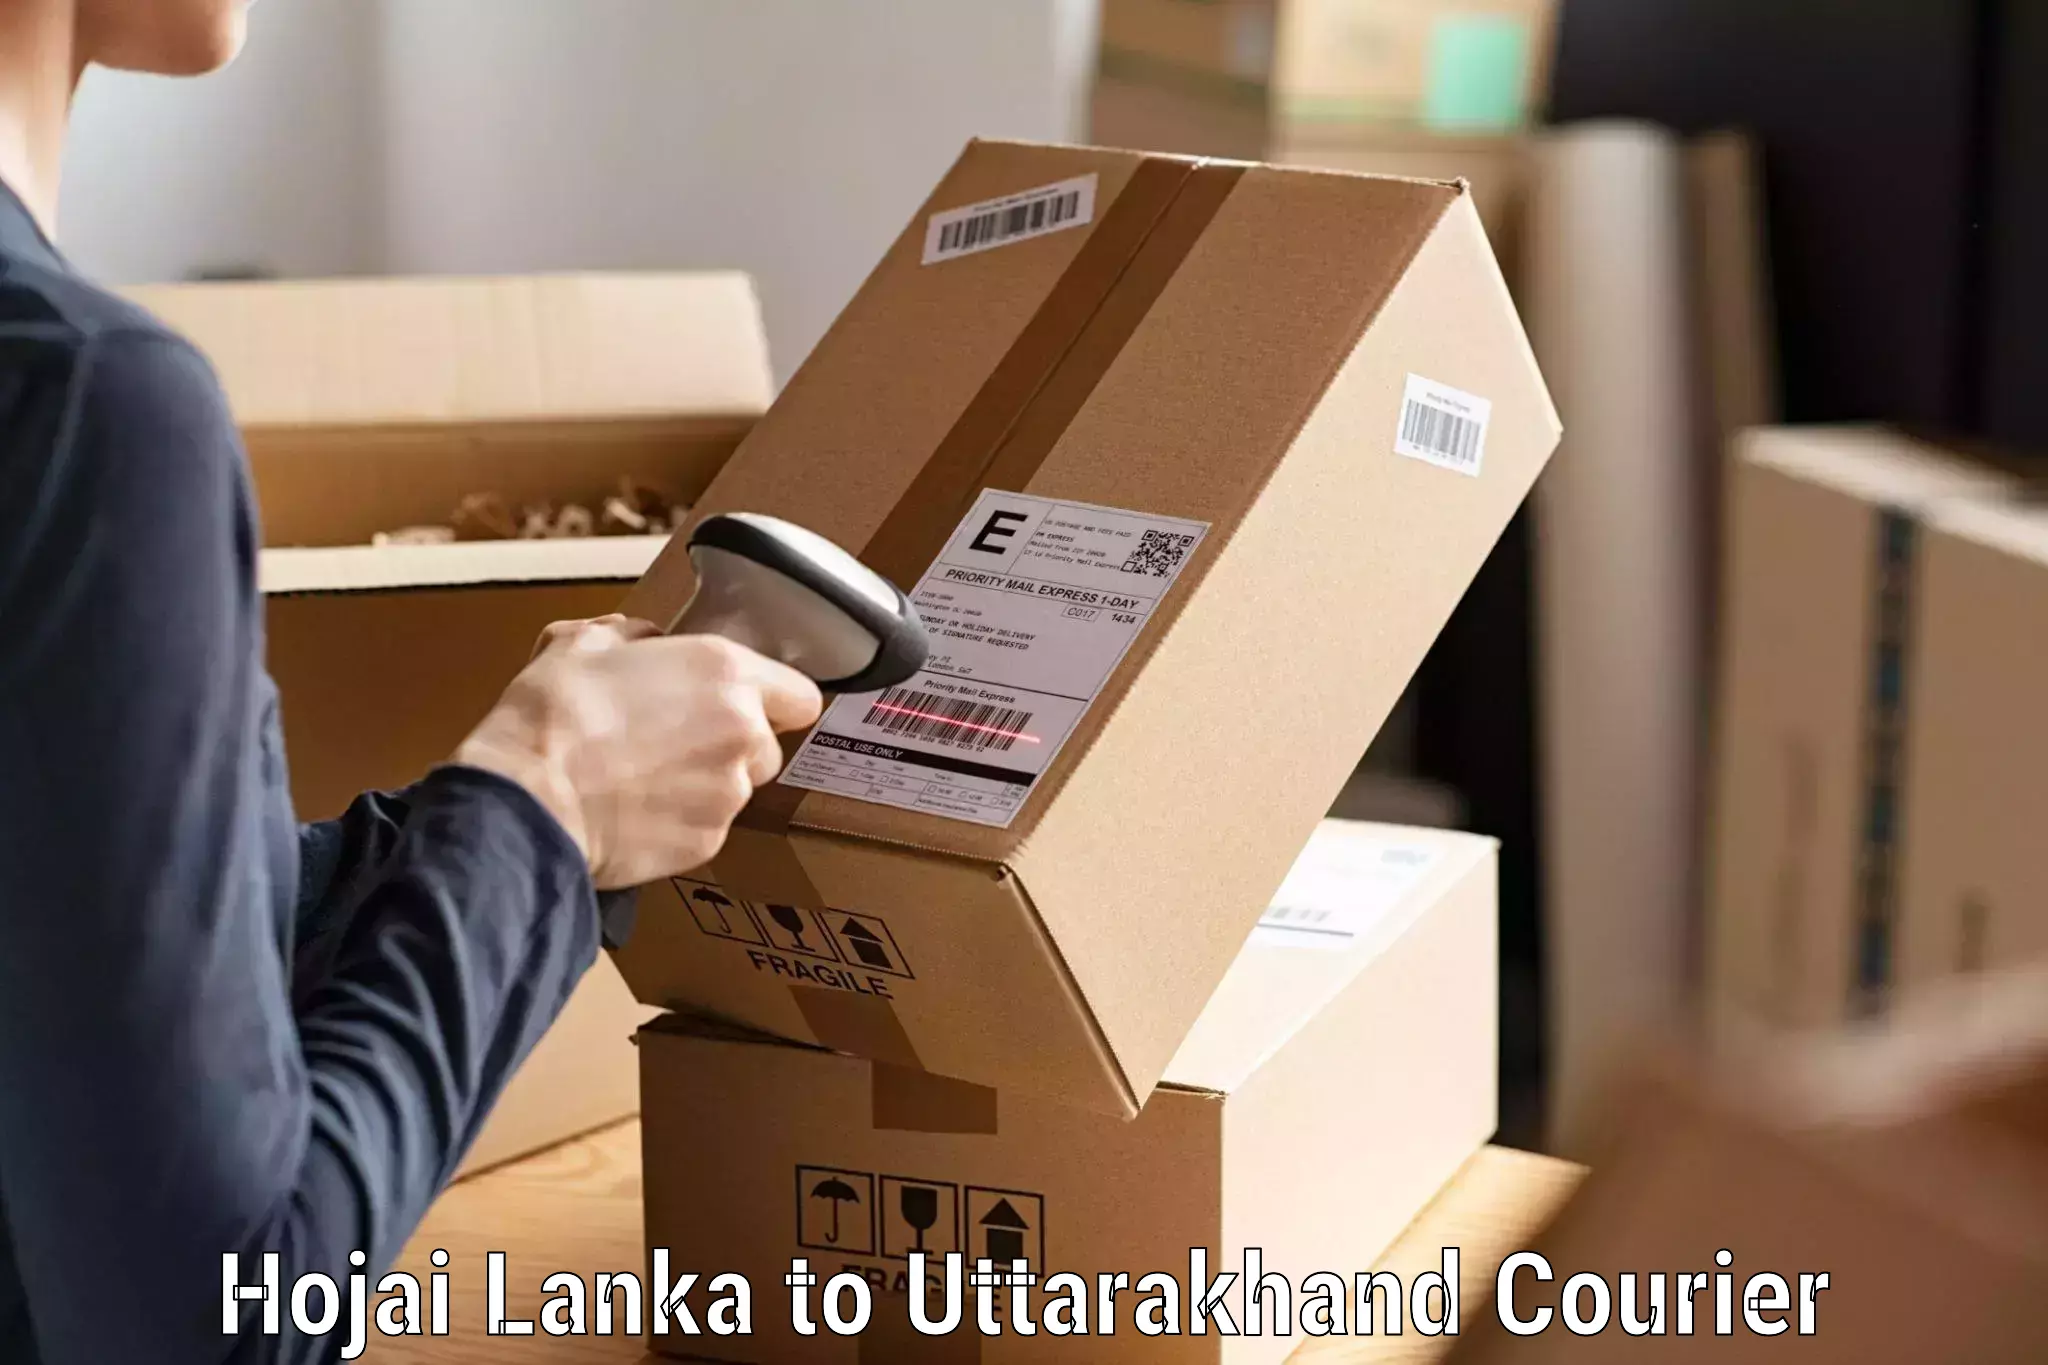 Reliable courier services Hojai Lanka to Rudrapur